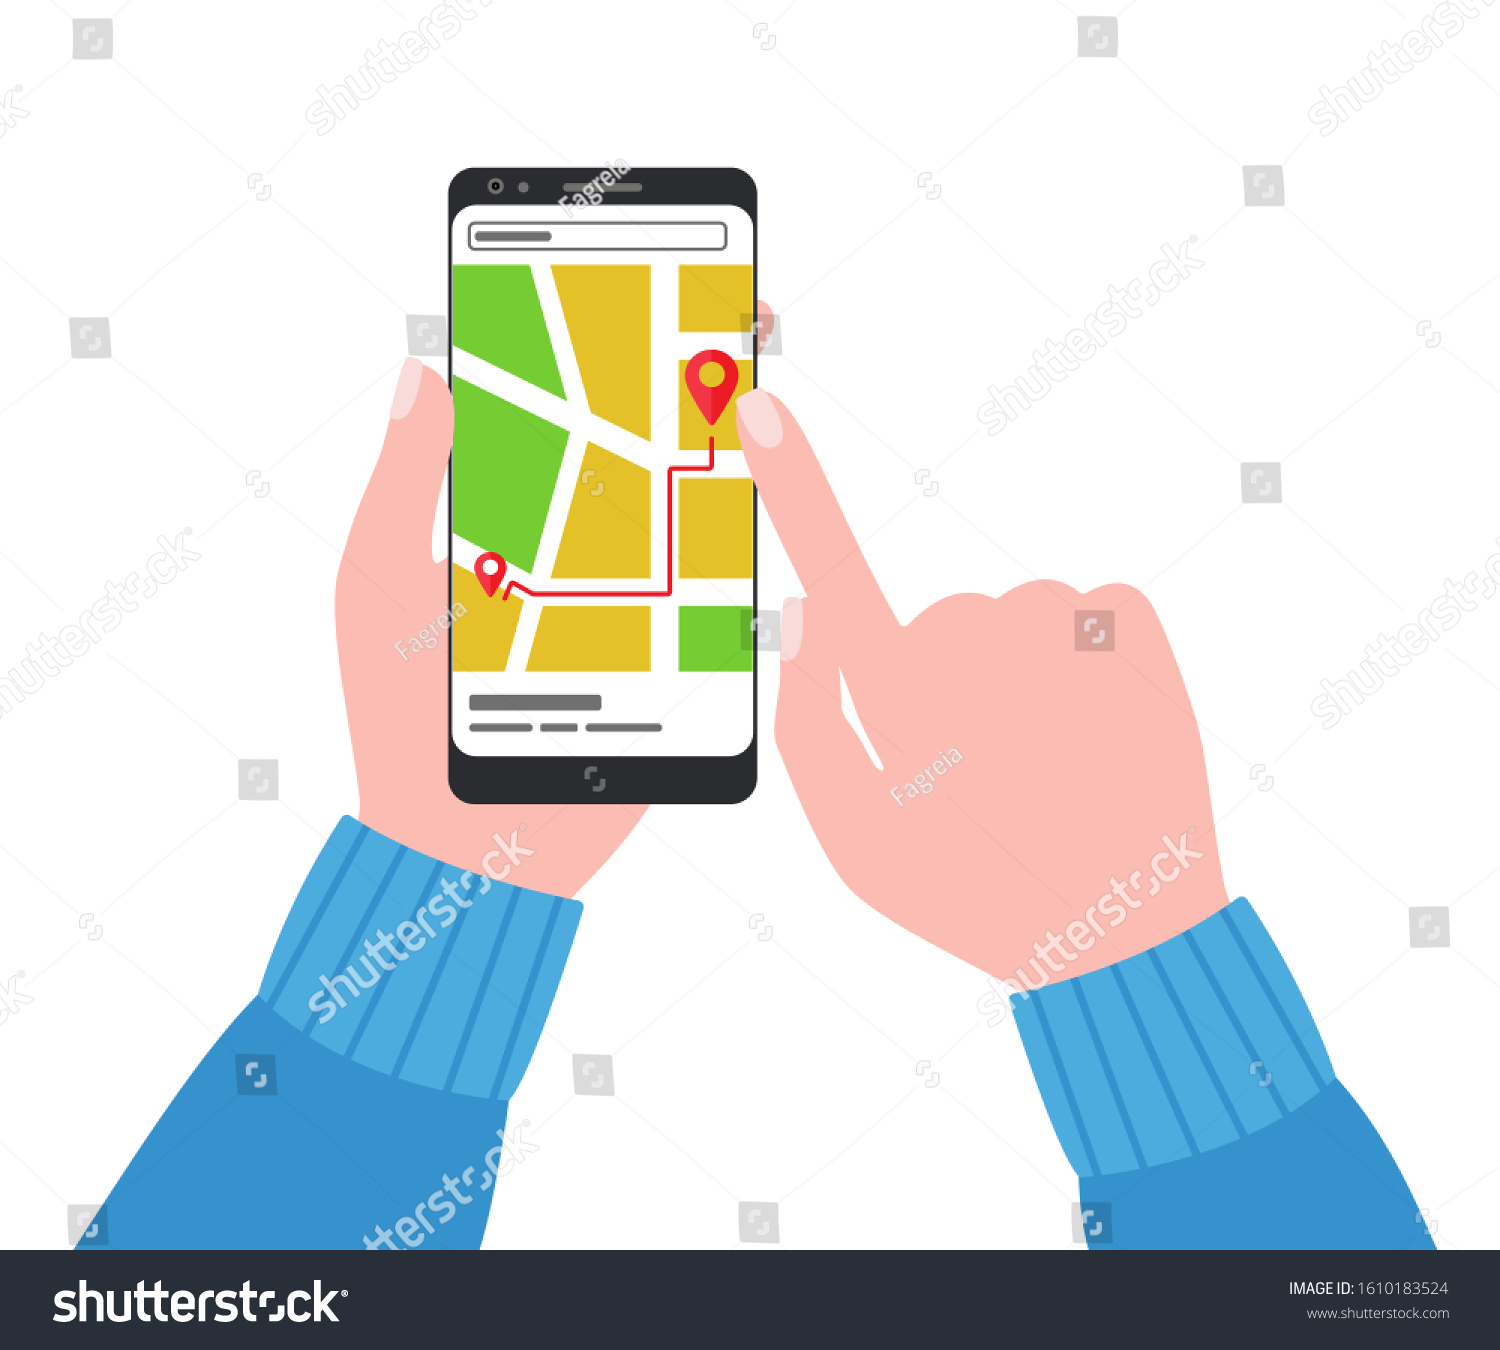 Smartphone City Map Human Hands Road Stock Vector (Royalty Free) 1610183524